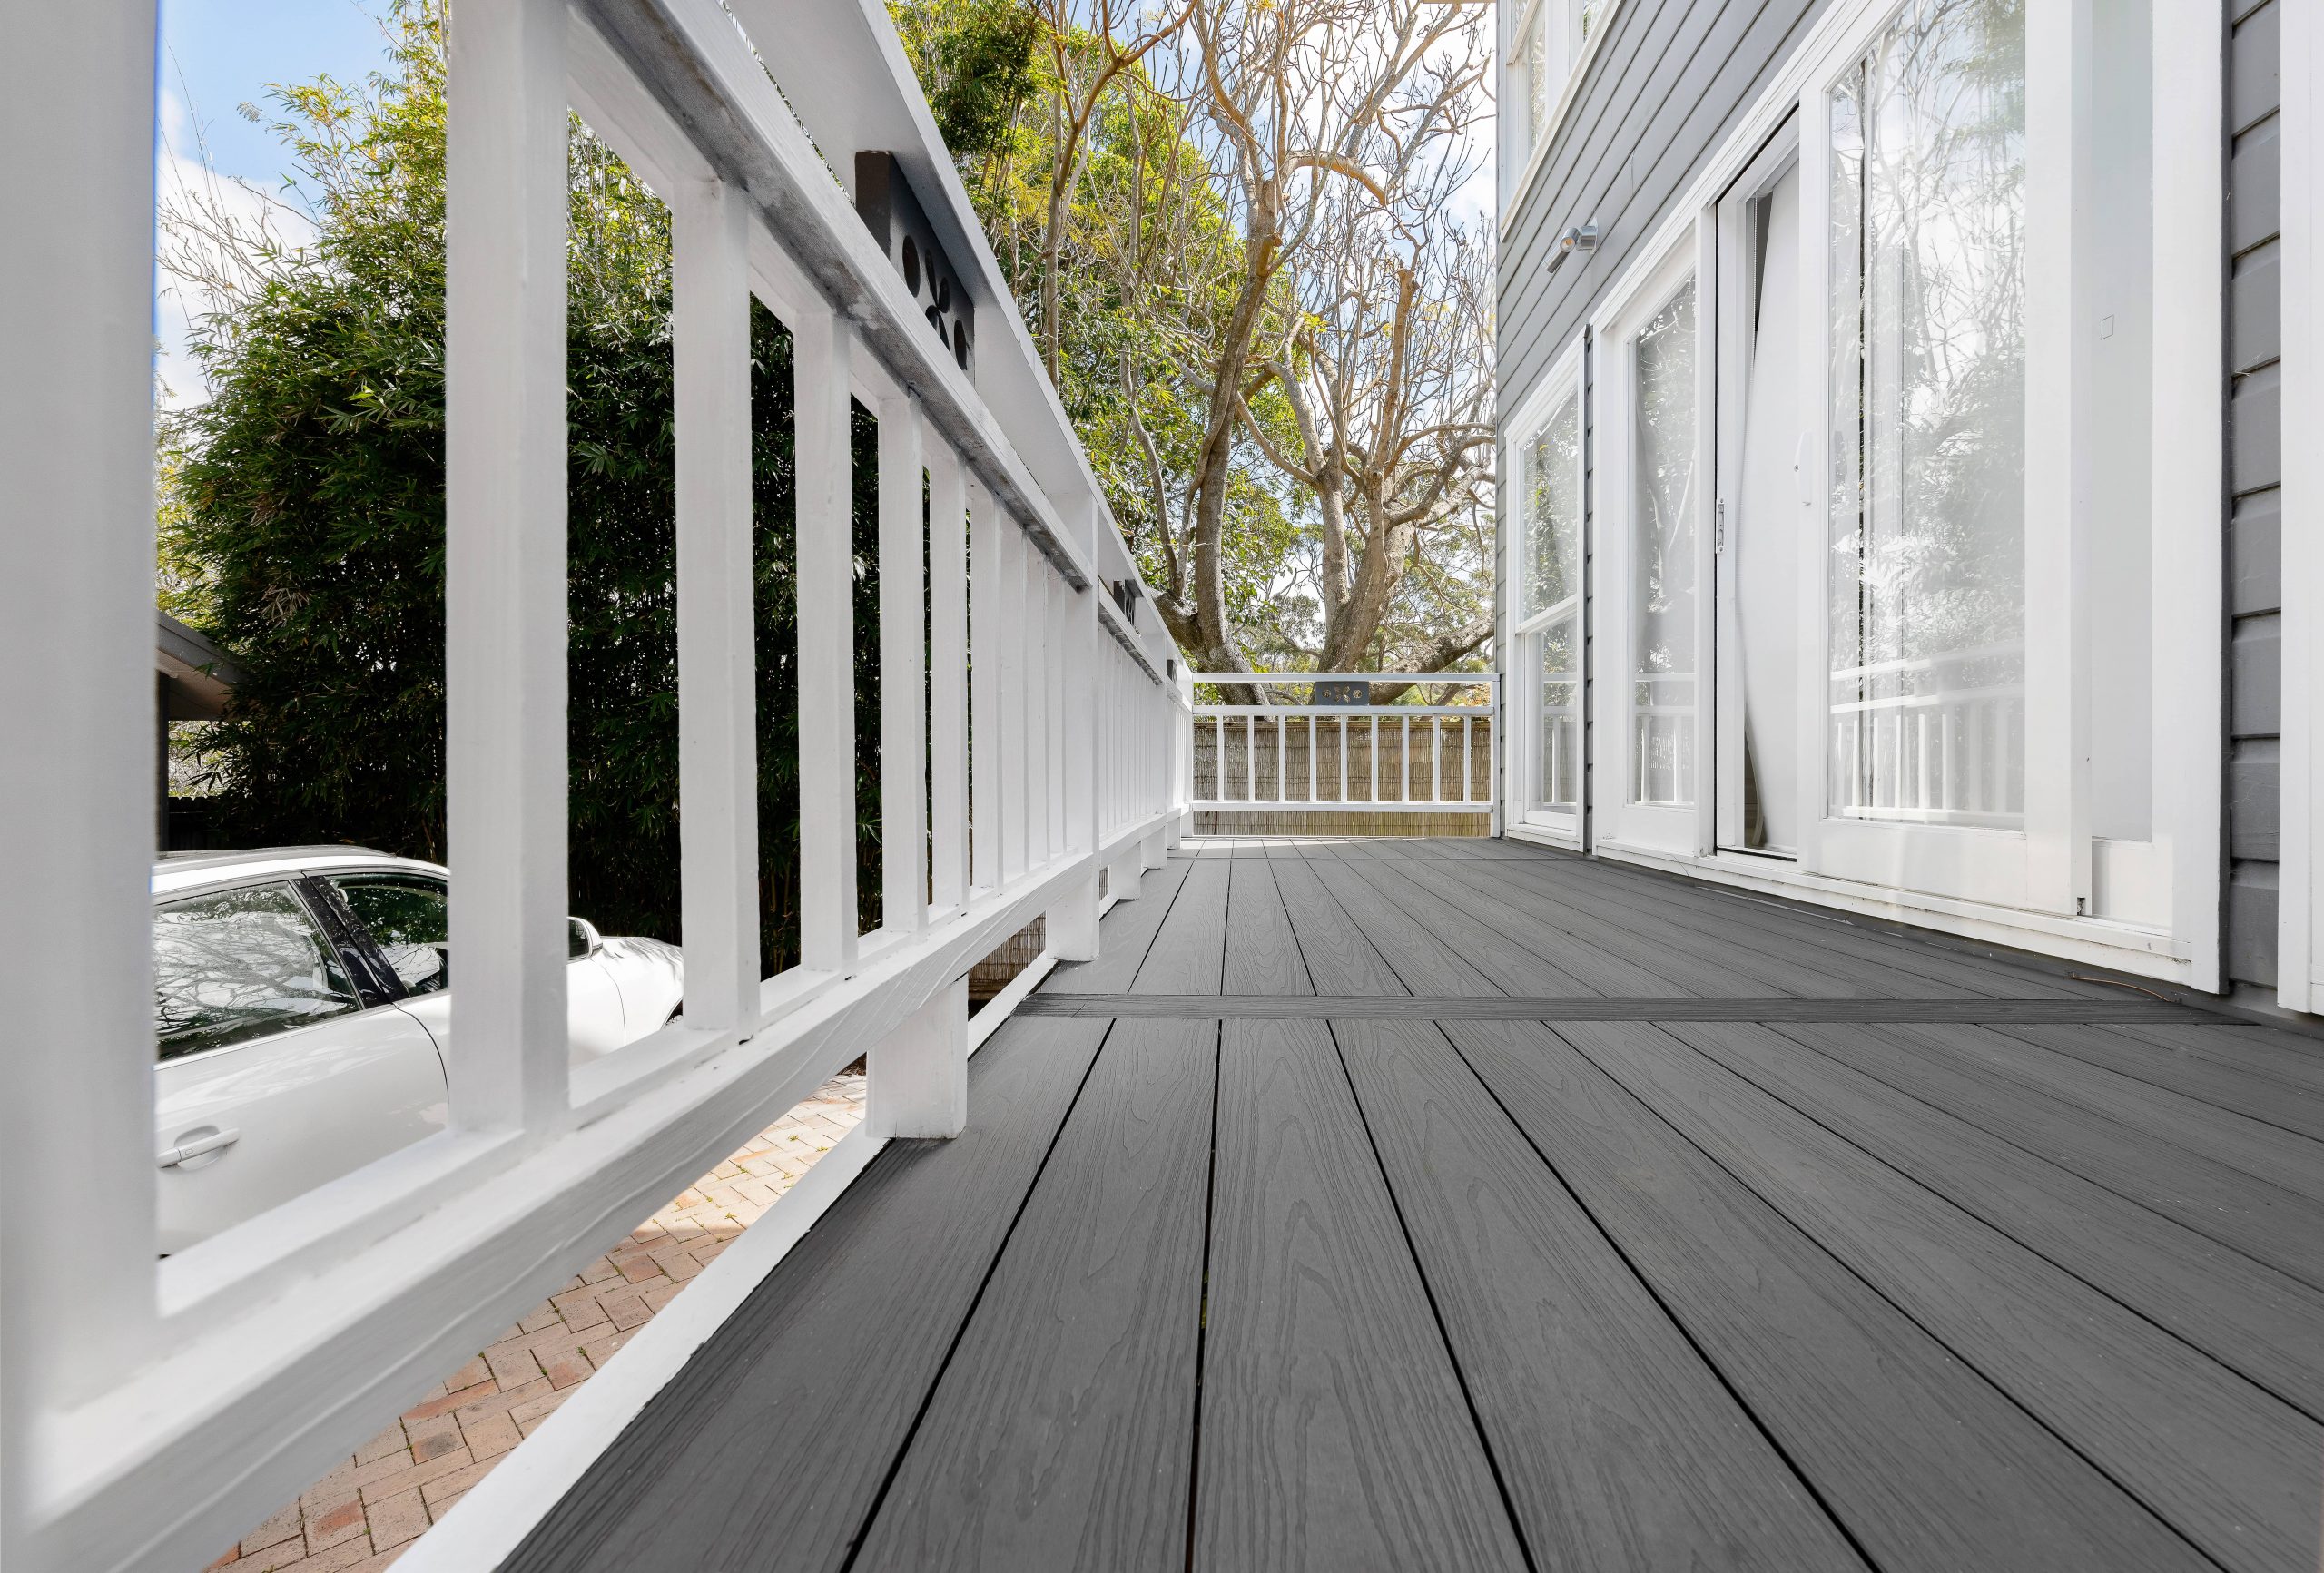 A close up of gray composite decking boards installed on a patio